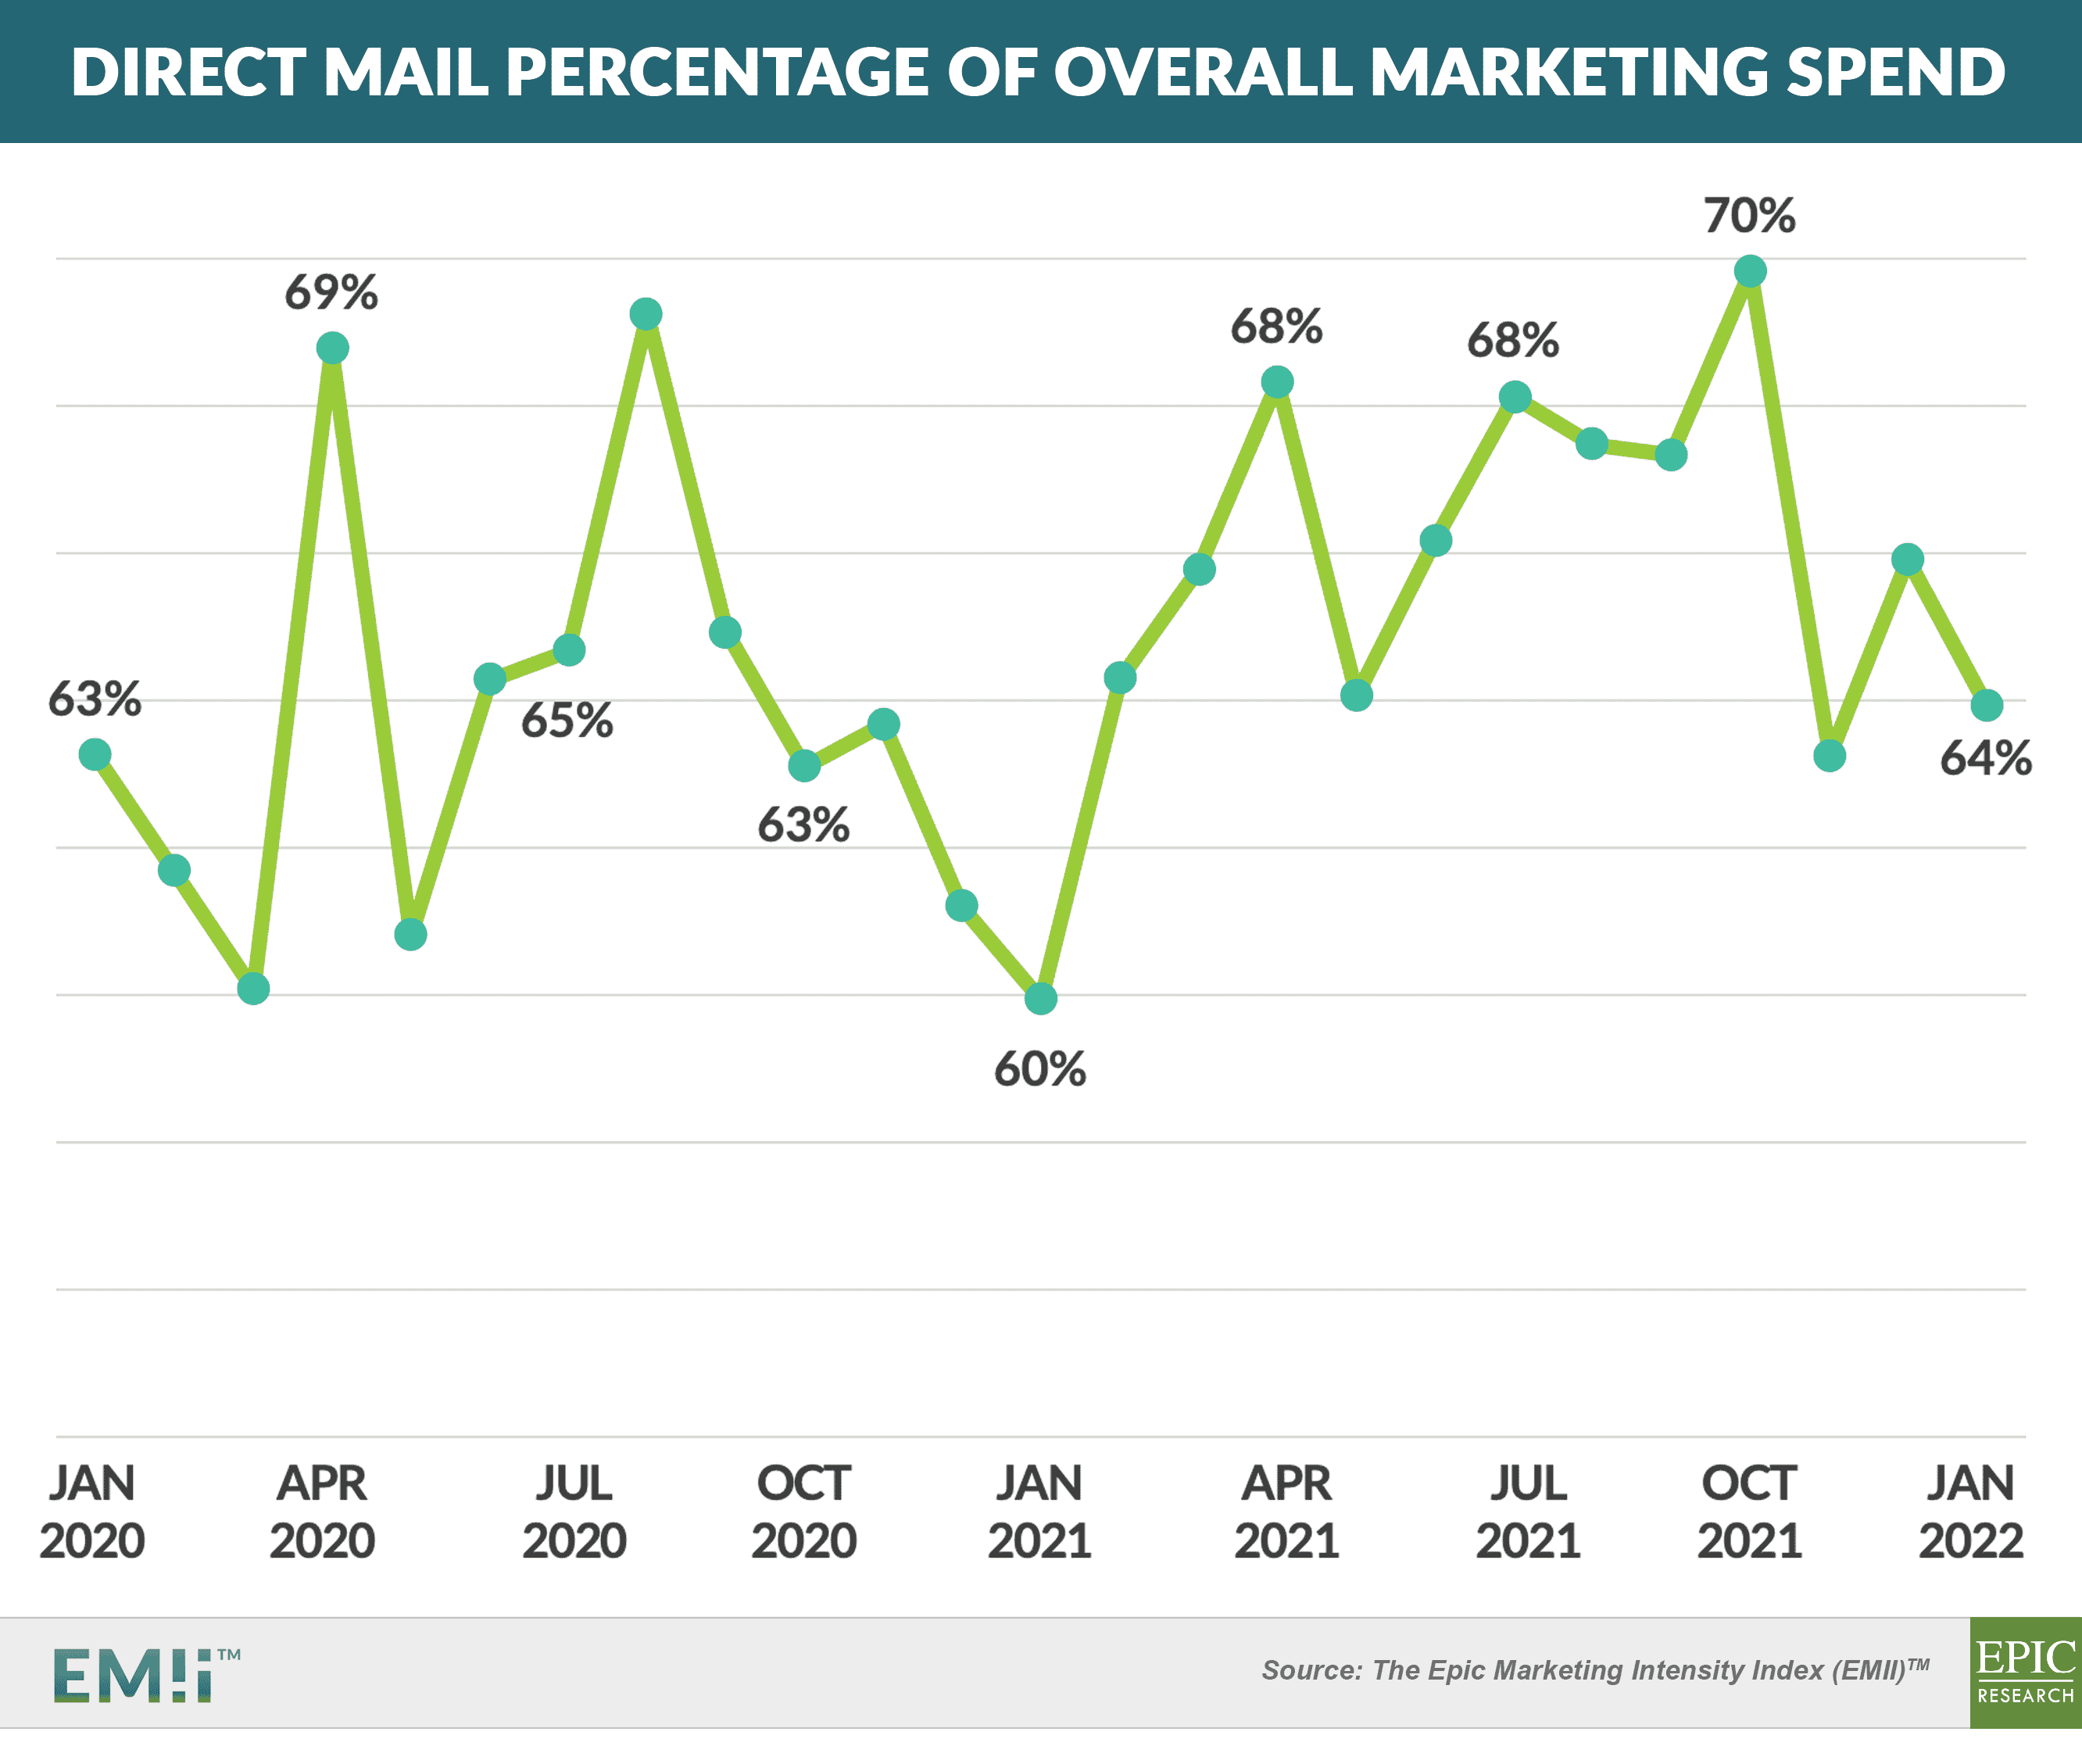 Percent Direct Mail Spend - vs overall 20220305 (1)